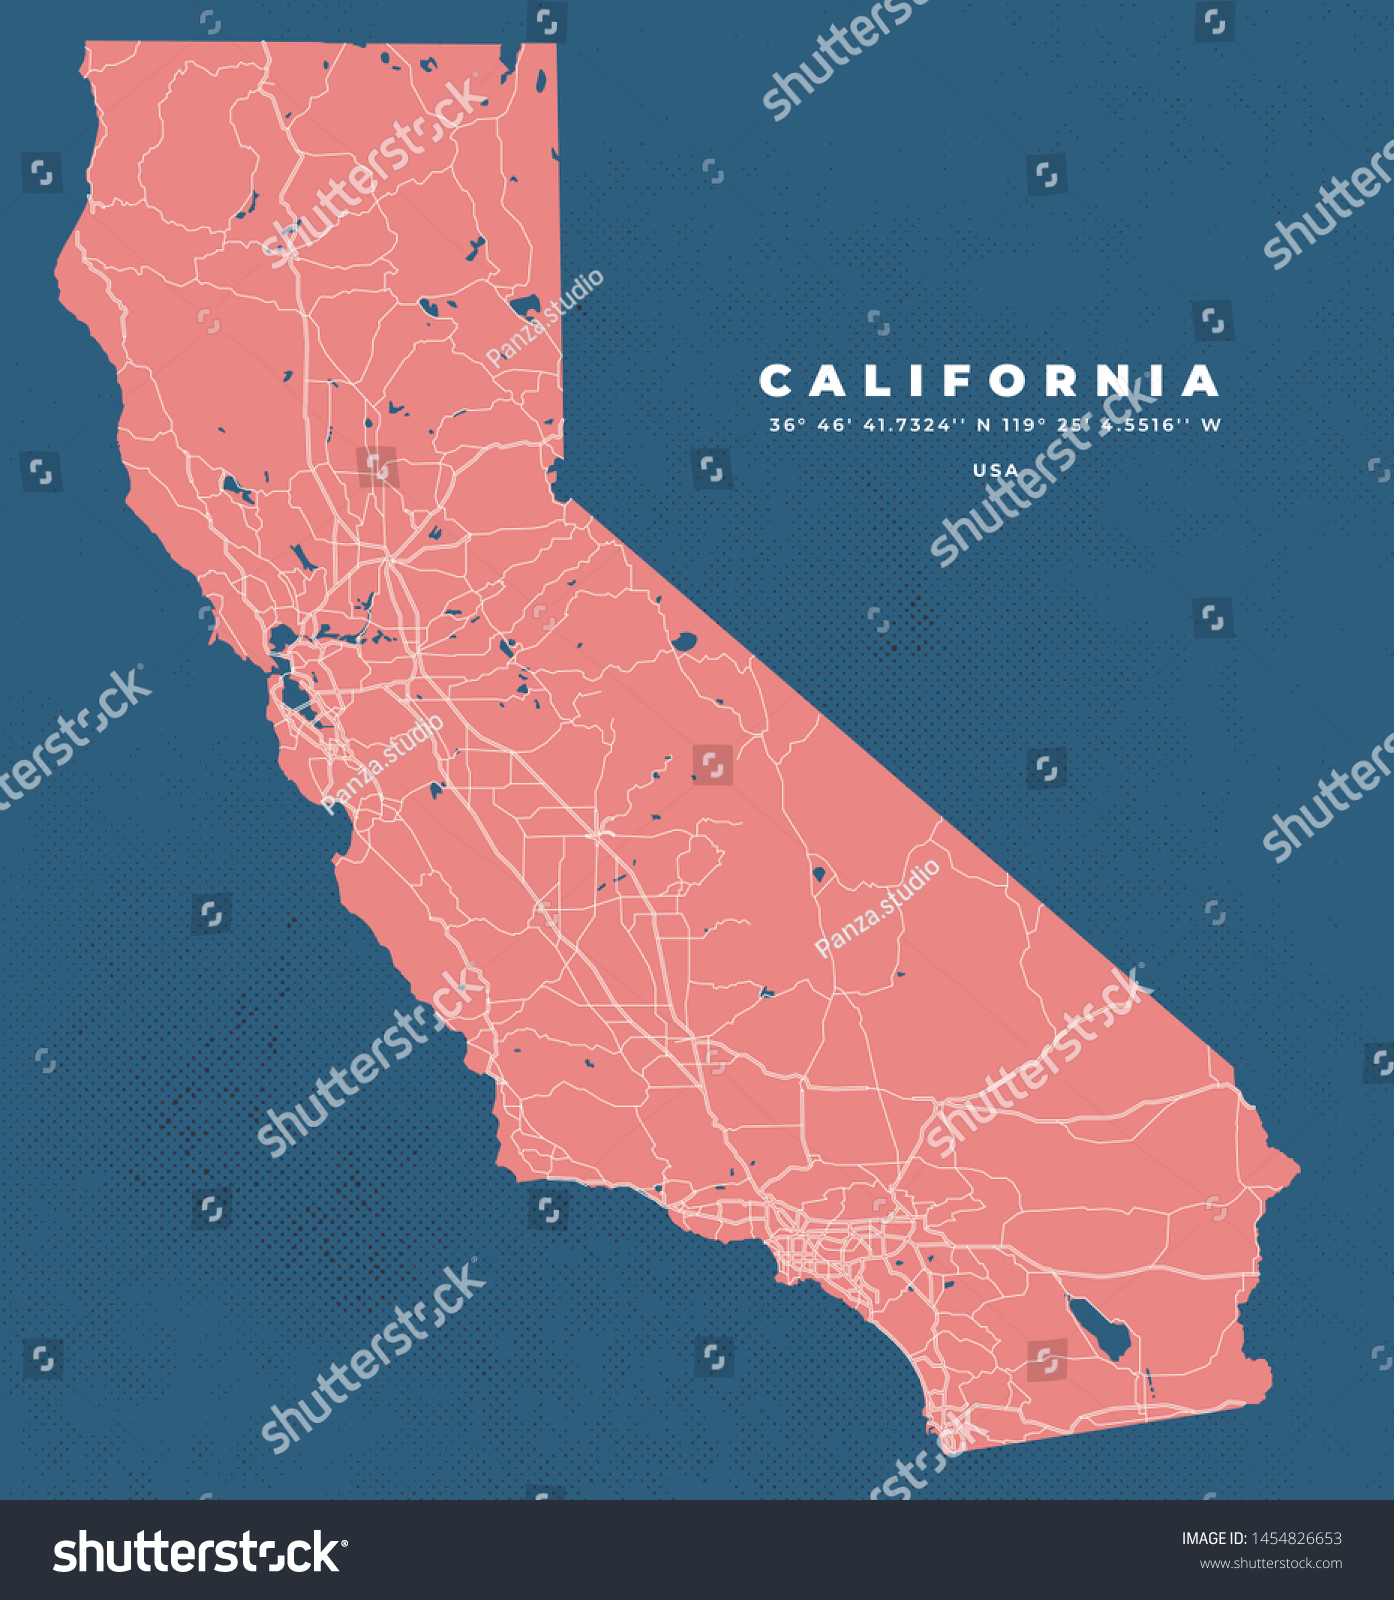 California USA Map Road Poster Vector halftone textures layers #1454826653